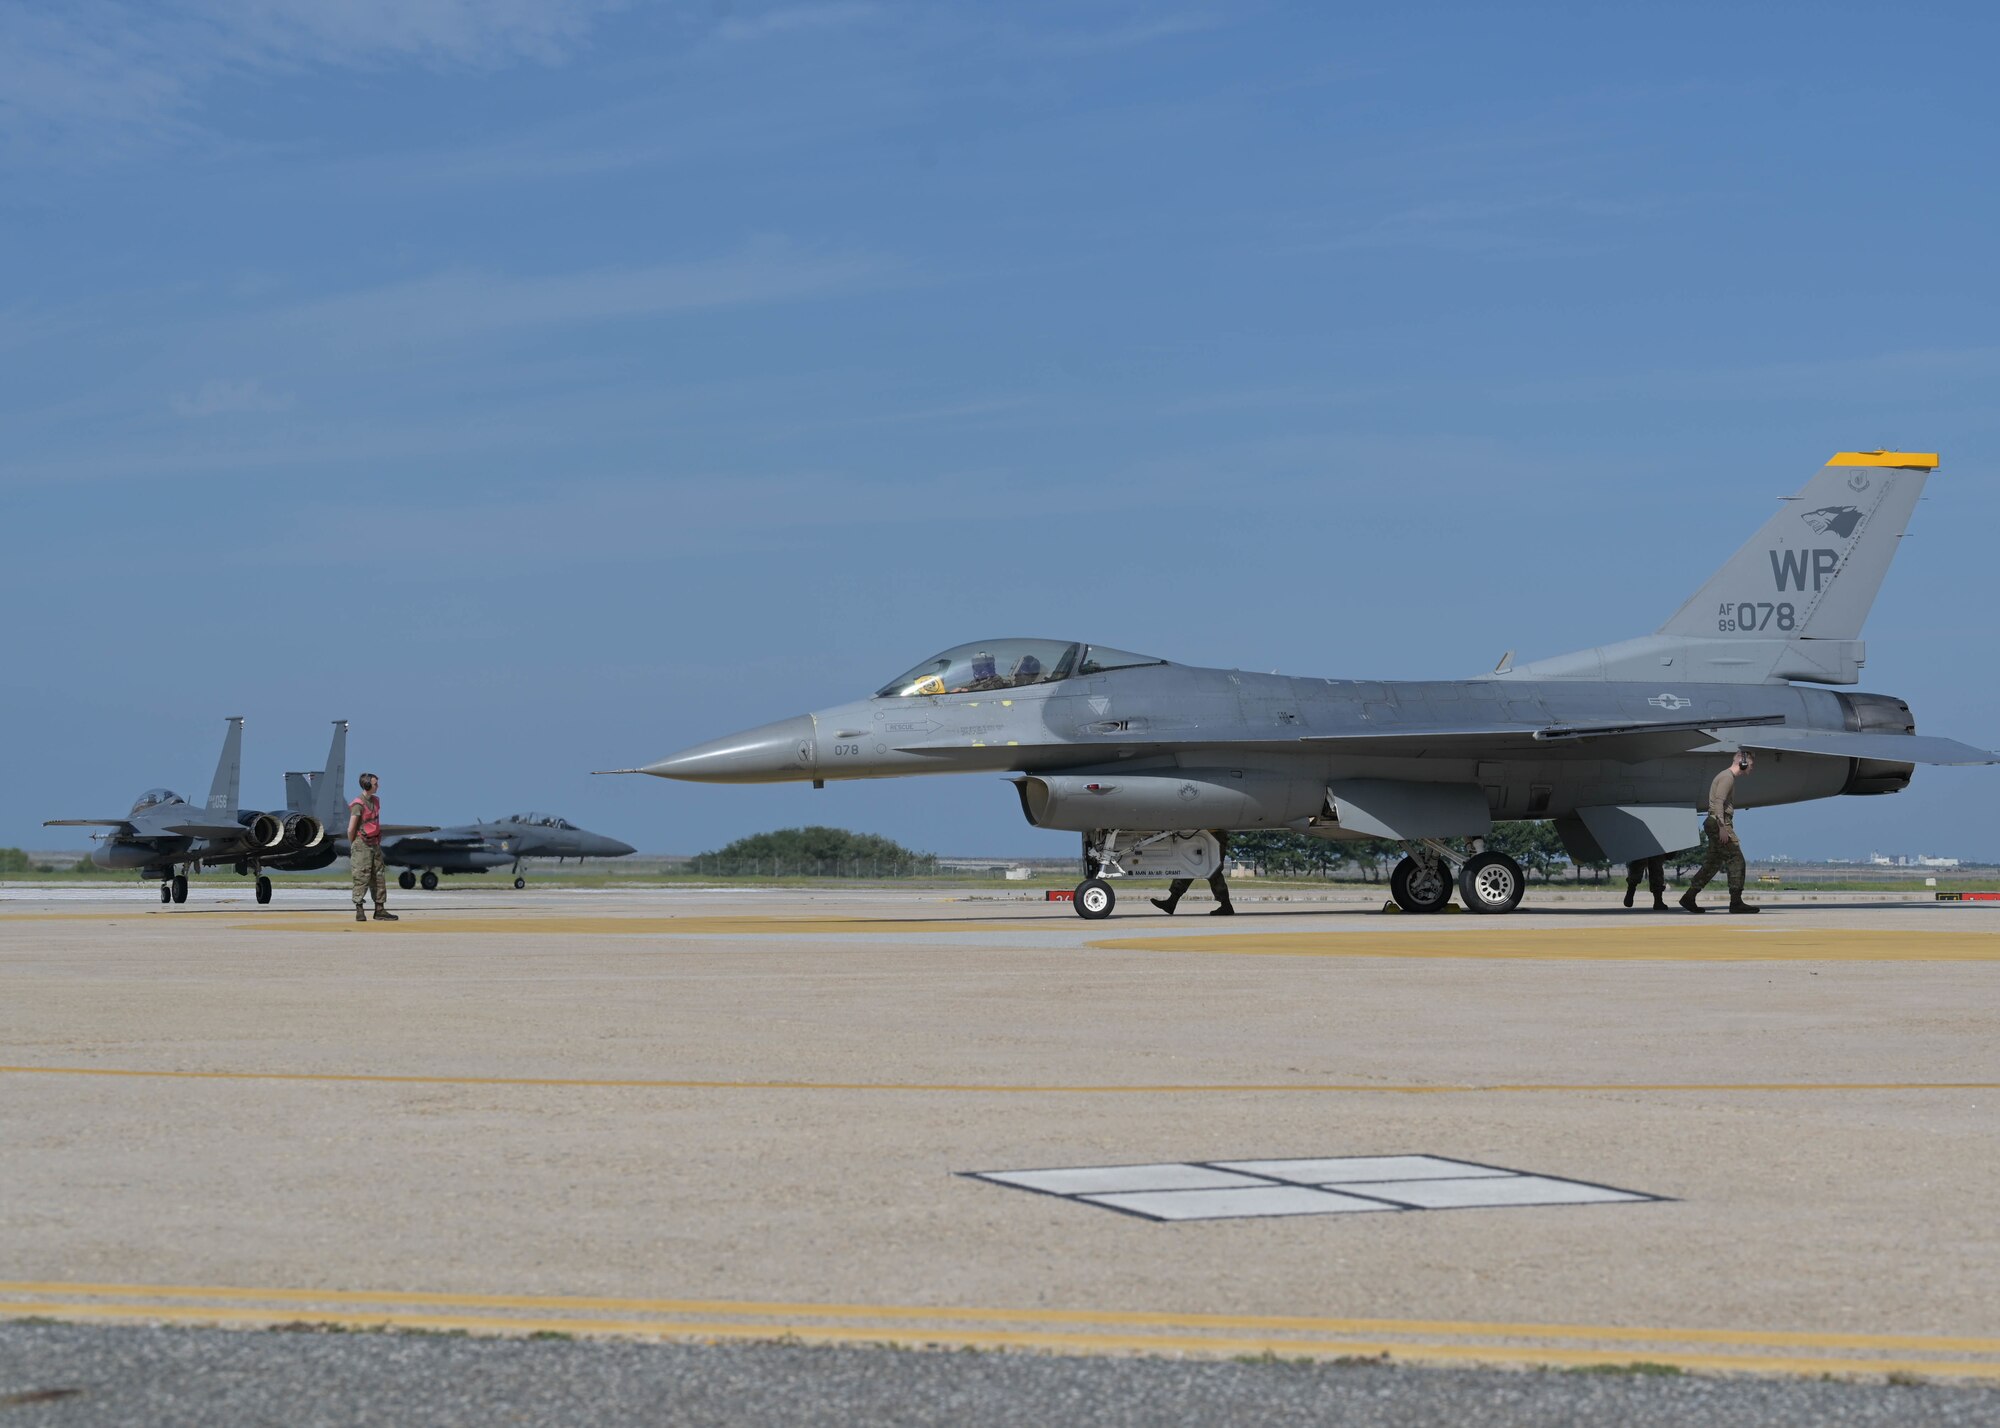 An 80th Fighter Squadron F-16 Fighting Falcon sits on the flightline as two Republic of Korea Air Force F-15K Slam Eagles assigned to the 110th Fighter Squadron taxi at Kunsan Air Base, Republic of Korea, Sept. 22, 2022. The two nations routinely host training events aimed at increasing their mission focus and interoperability. (U.S. Air Force photo by Staff Sgt. Isaiah J. Soliz)